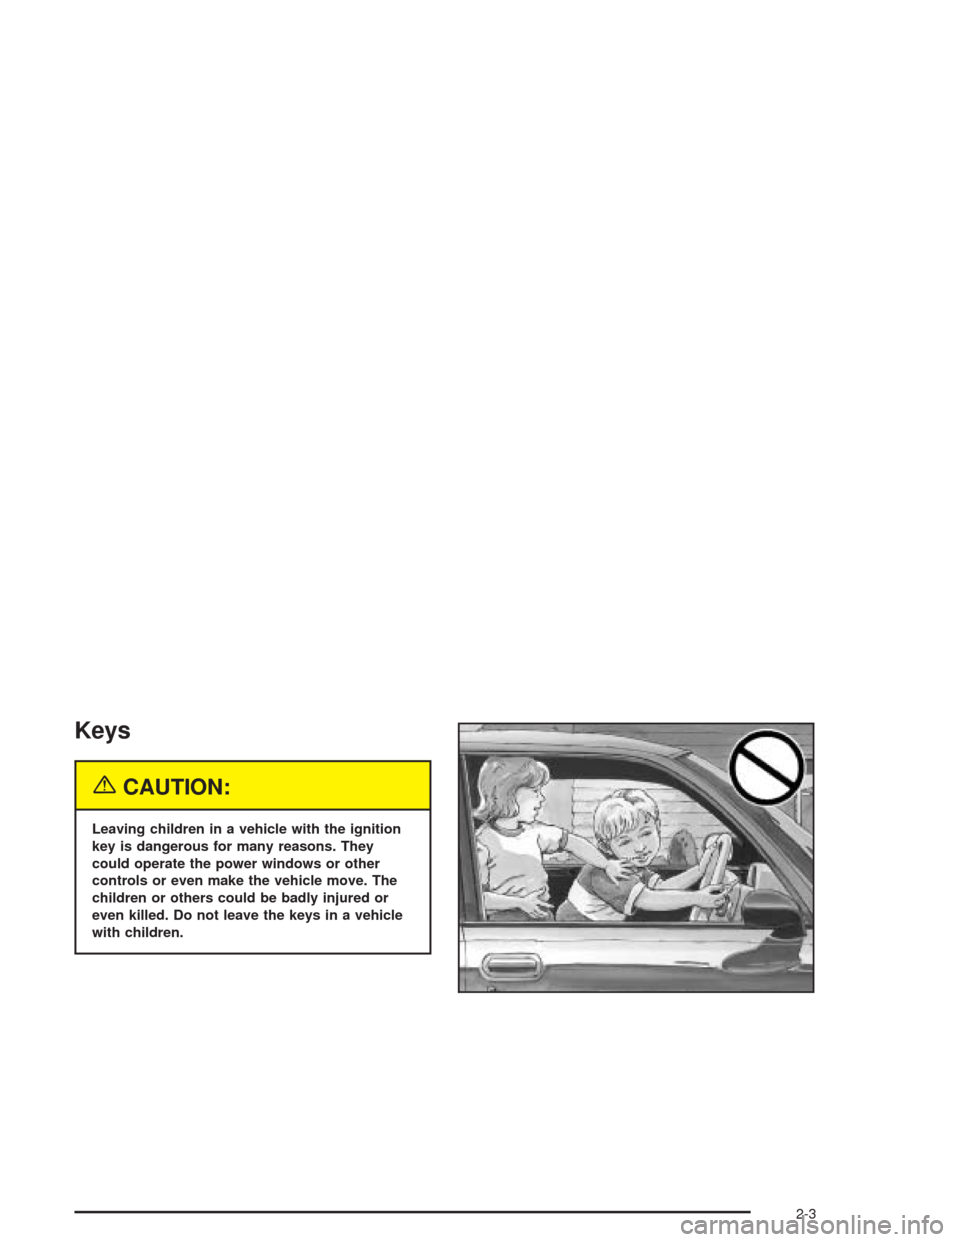 CHEVROLET AVALANCHE 2004 1.G Owners Manual Keys
{CAUTION:
Leaving children in a vehicle with the ignition
key is dangerous for many reasons. They
could operate the power windows or other
controls or even make the vehicle move. The
children or 